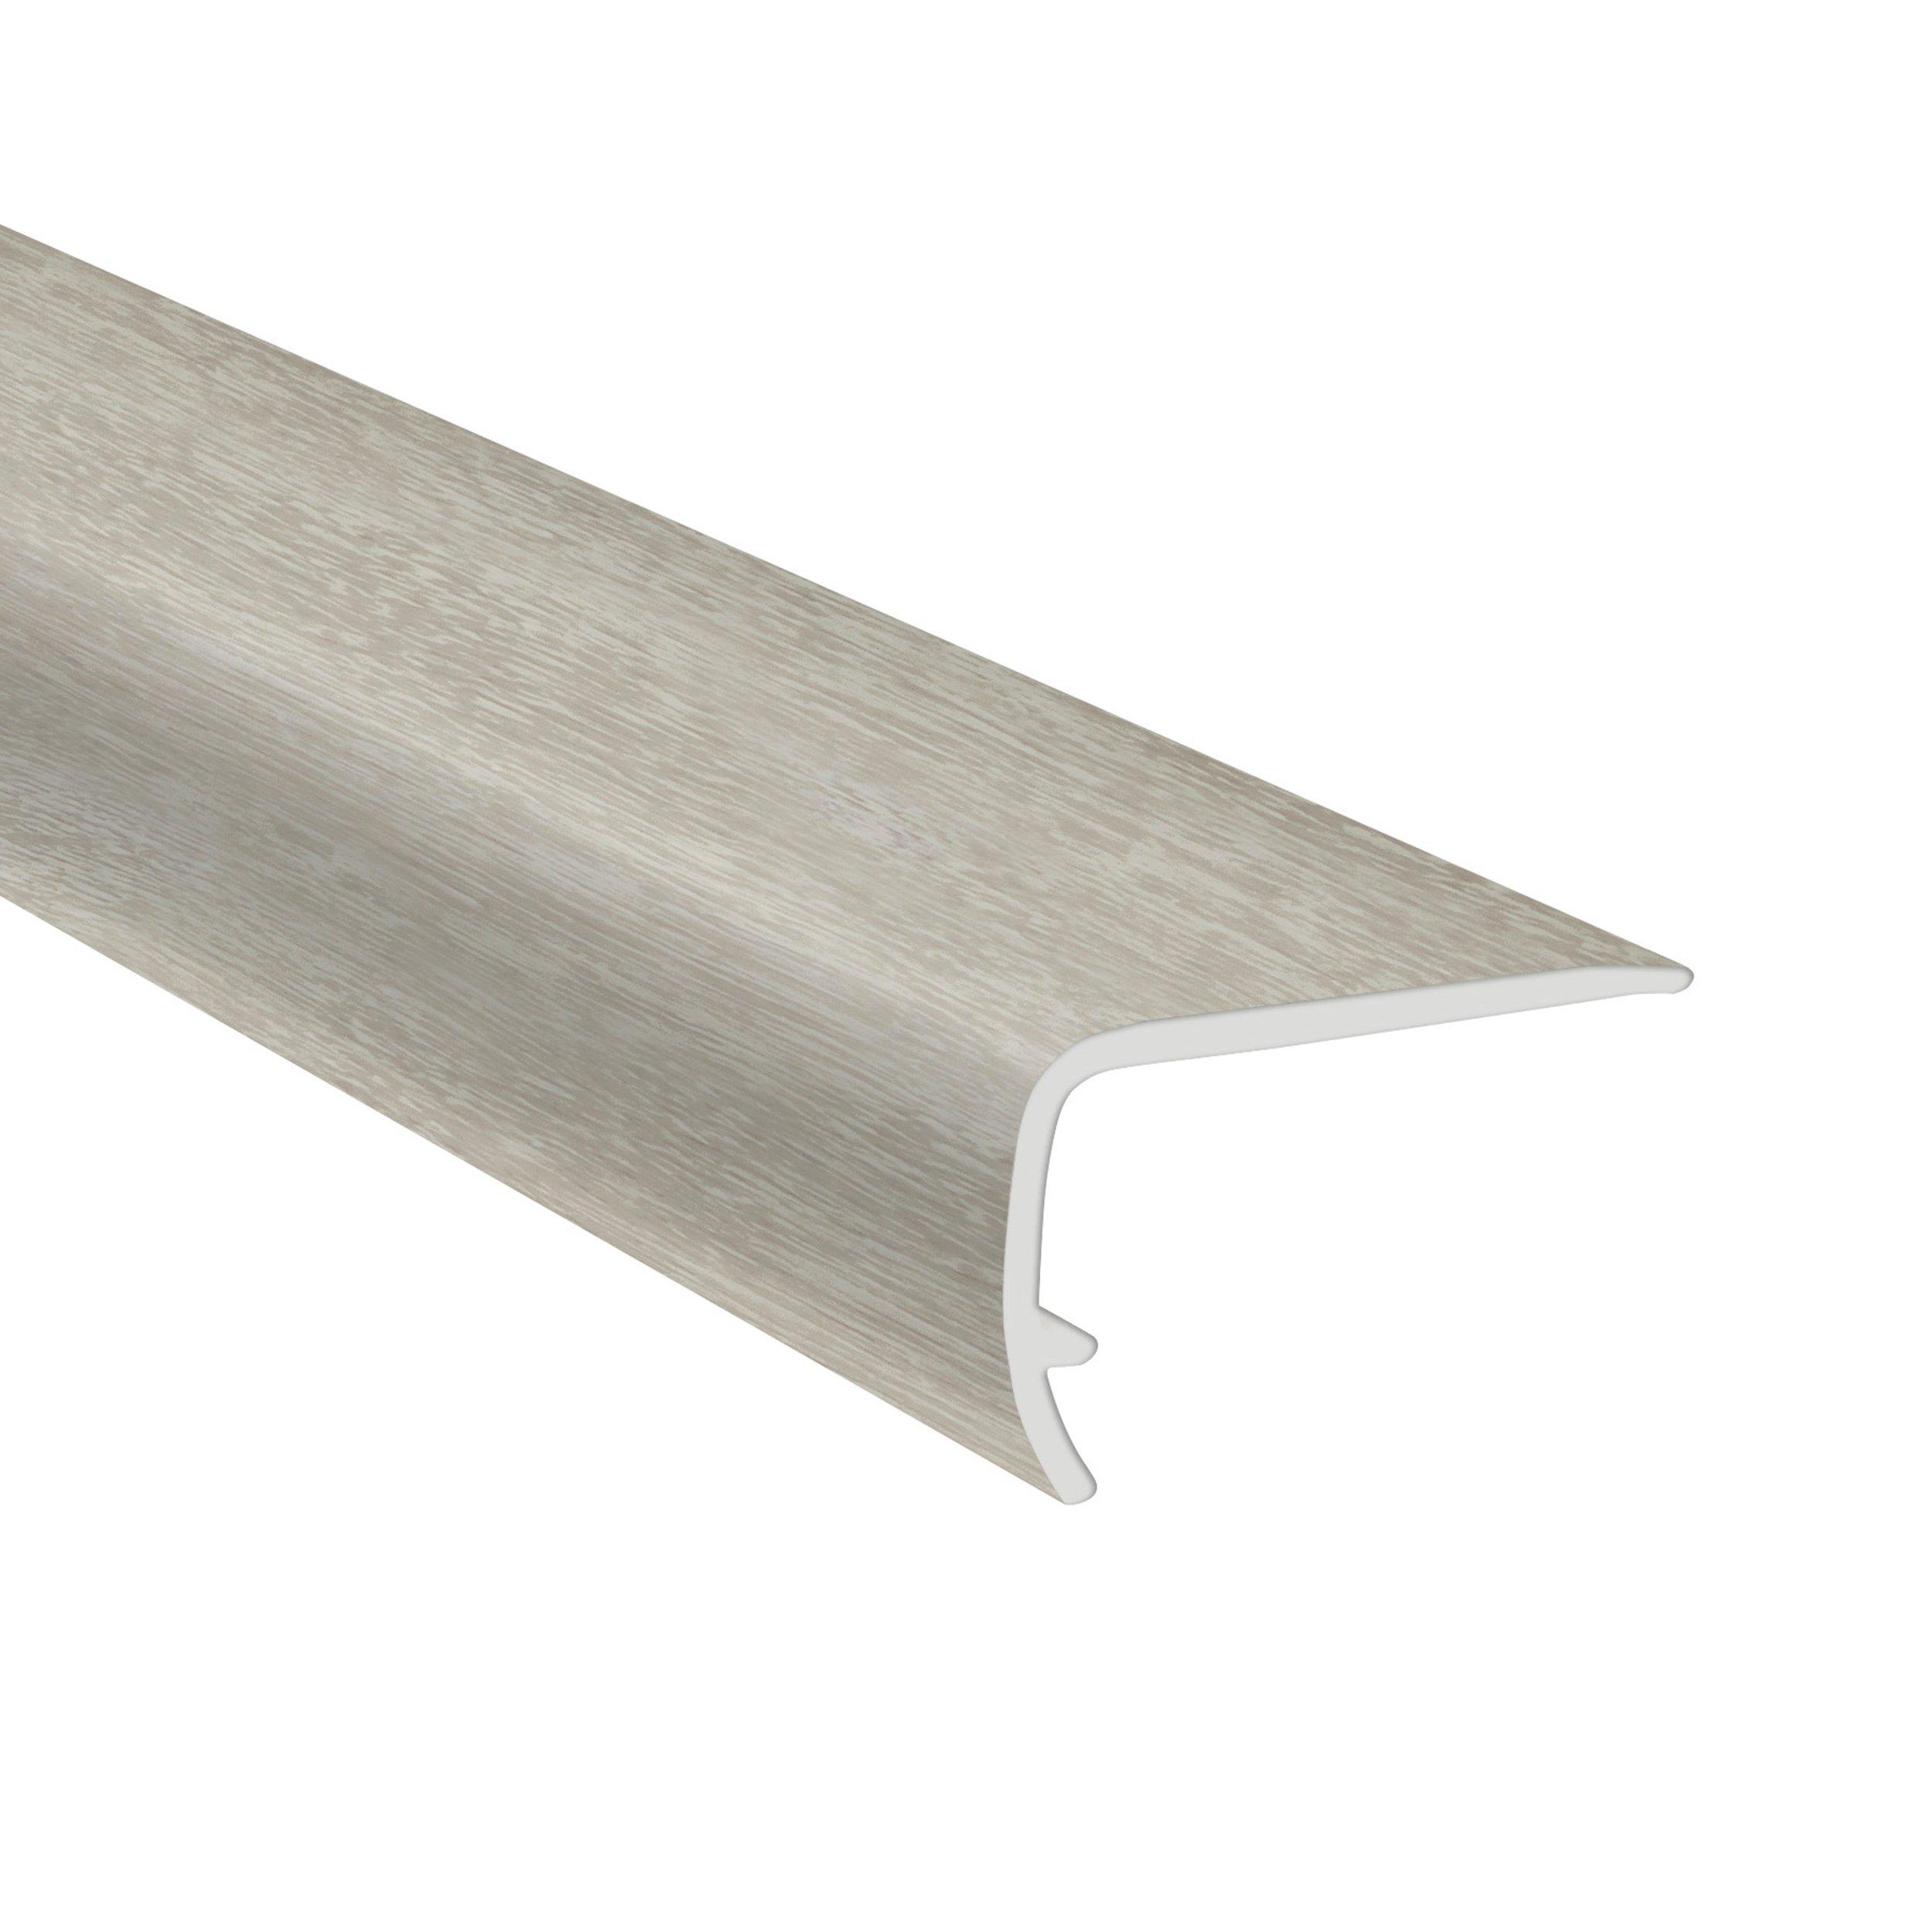 Tortuga Trace 94in. Vinyl Overlapping Stair Nose